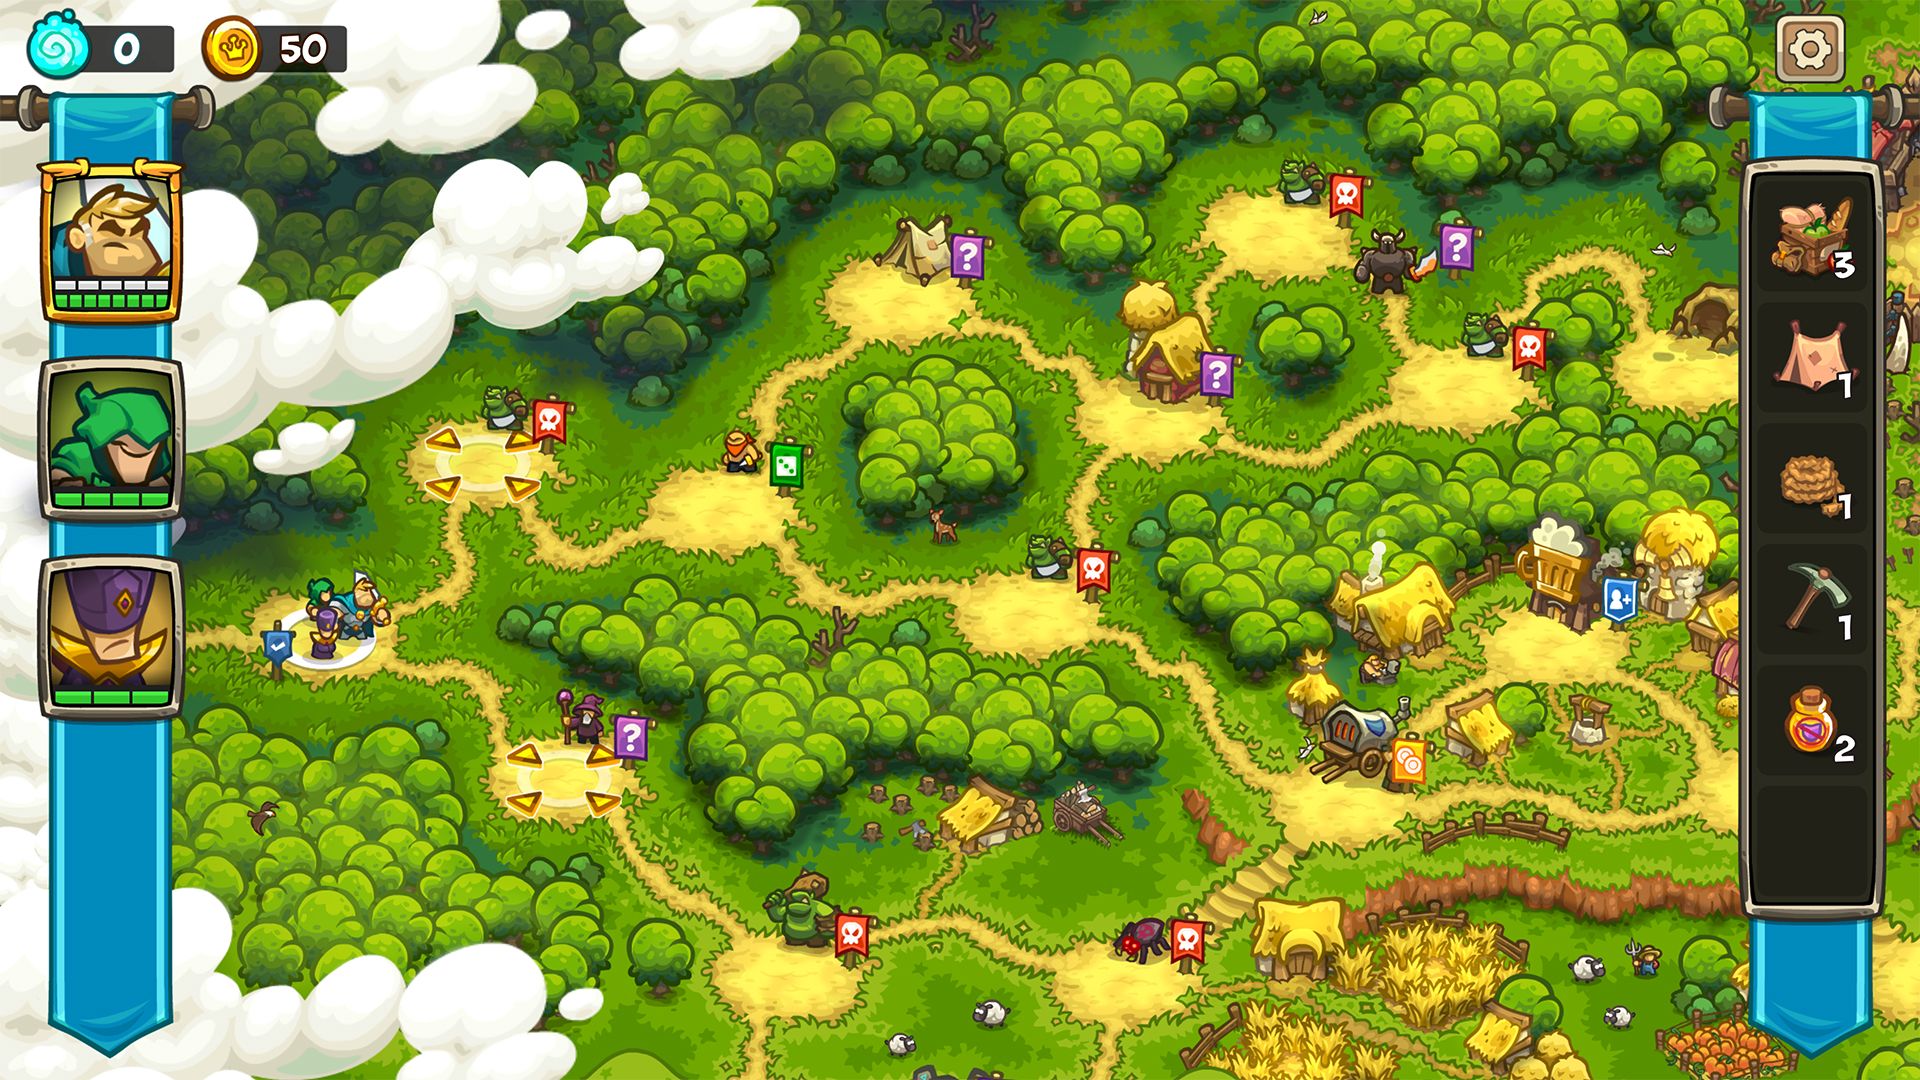 Game screenshot;  the world map full of forests and yellow paths between picturesque villages and enemy camps.